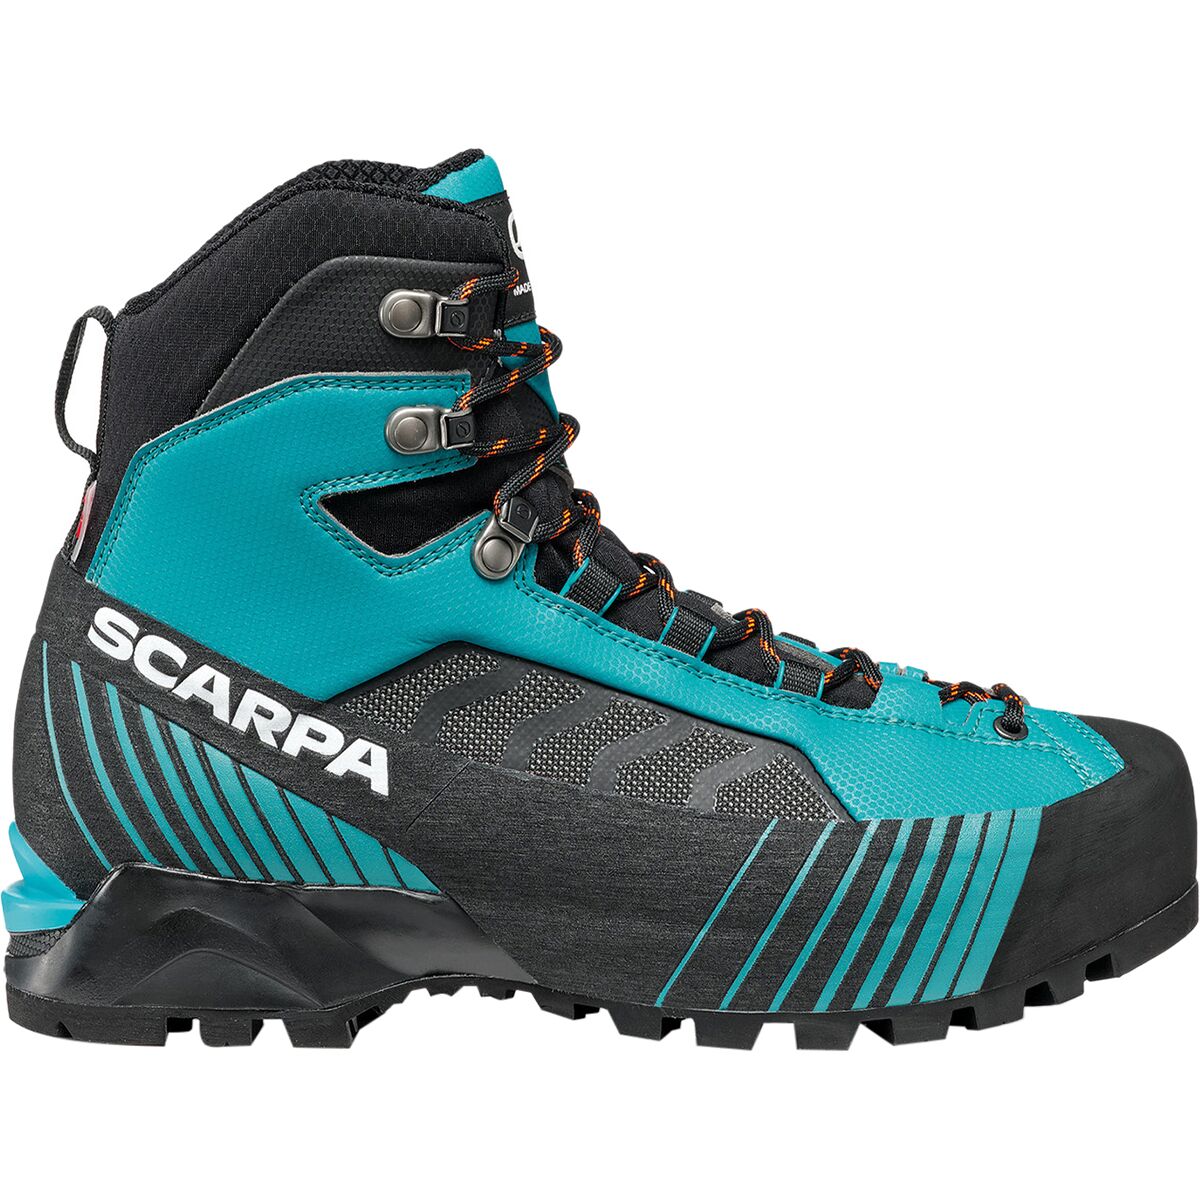 Pre-owned Scarpa Ribelle Lite Hd Mountaineering Boot - Women's In Baltic/baltic